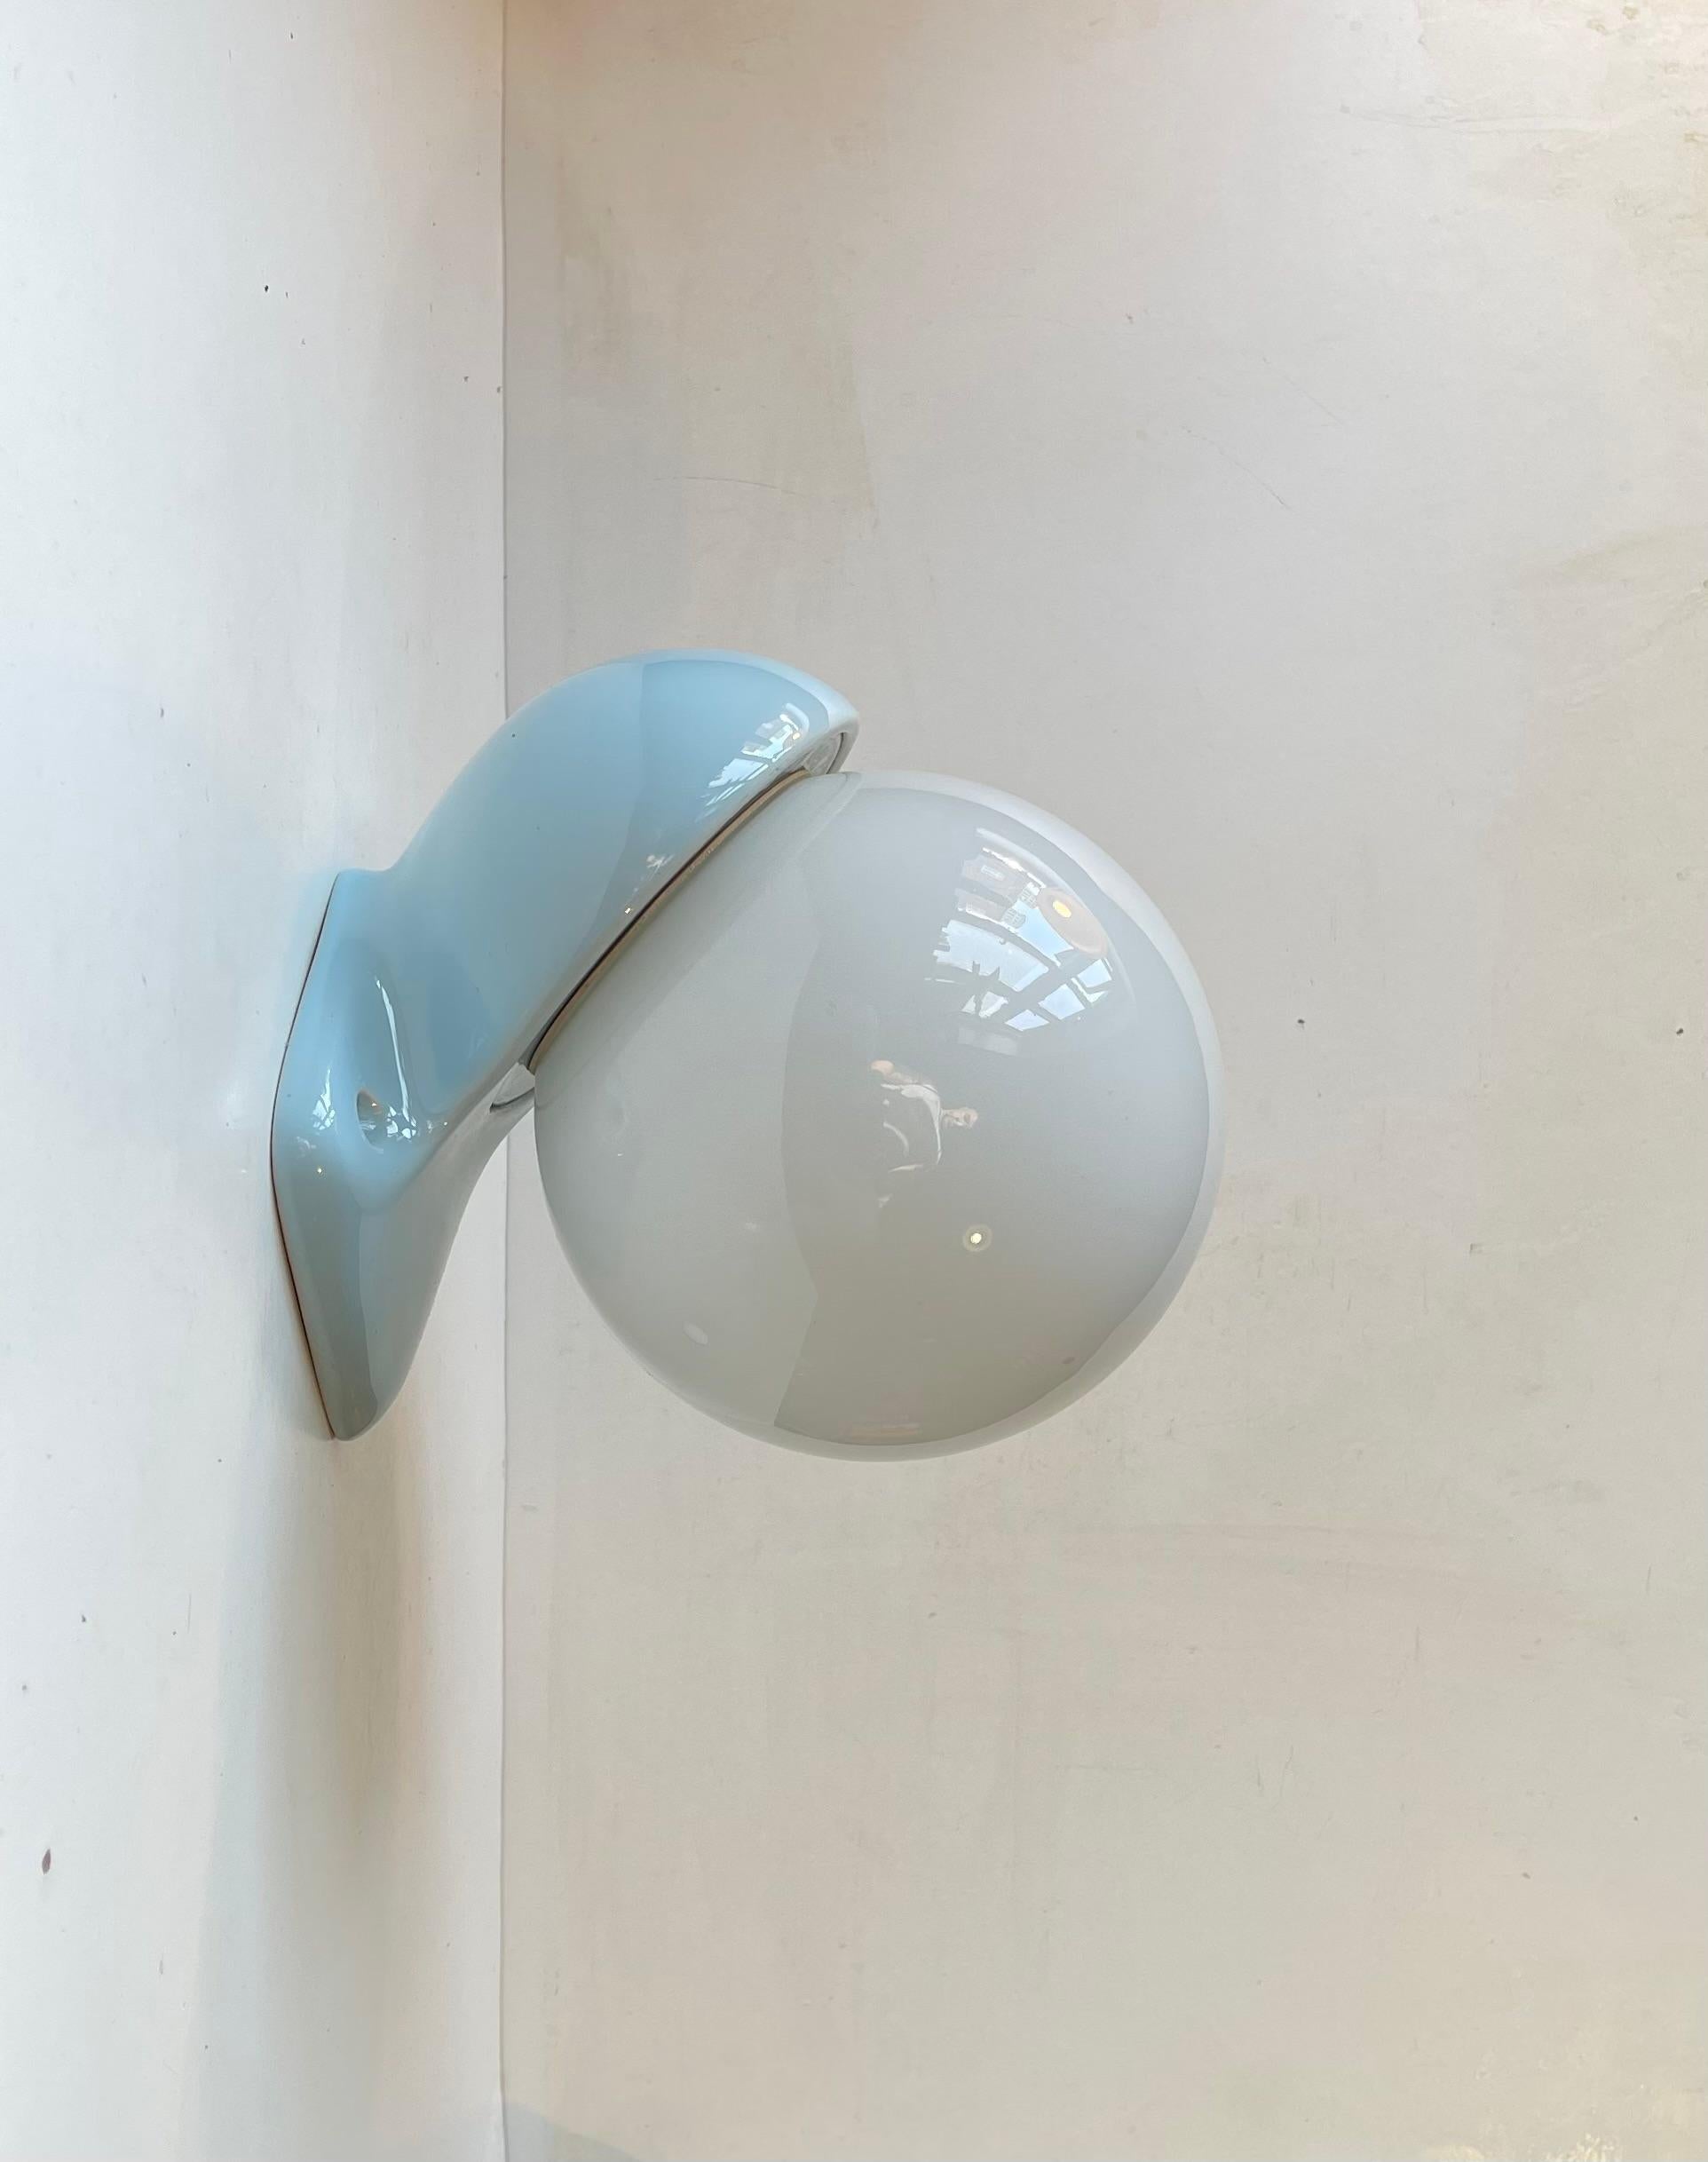 Spherical Wall sconce model 6030 suitable as bathroom or outdoor lighting. Designed by Prince Sigvard Bernadotte for the swedish company Ifö during the 1960s. Baby blue glazed porcelain mount set with a white opaline glass shade. 2 way mount -